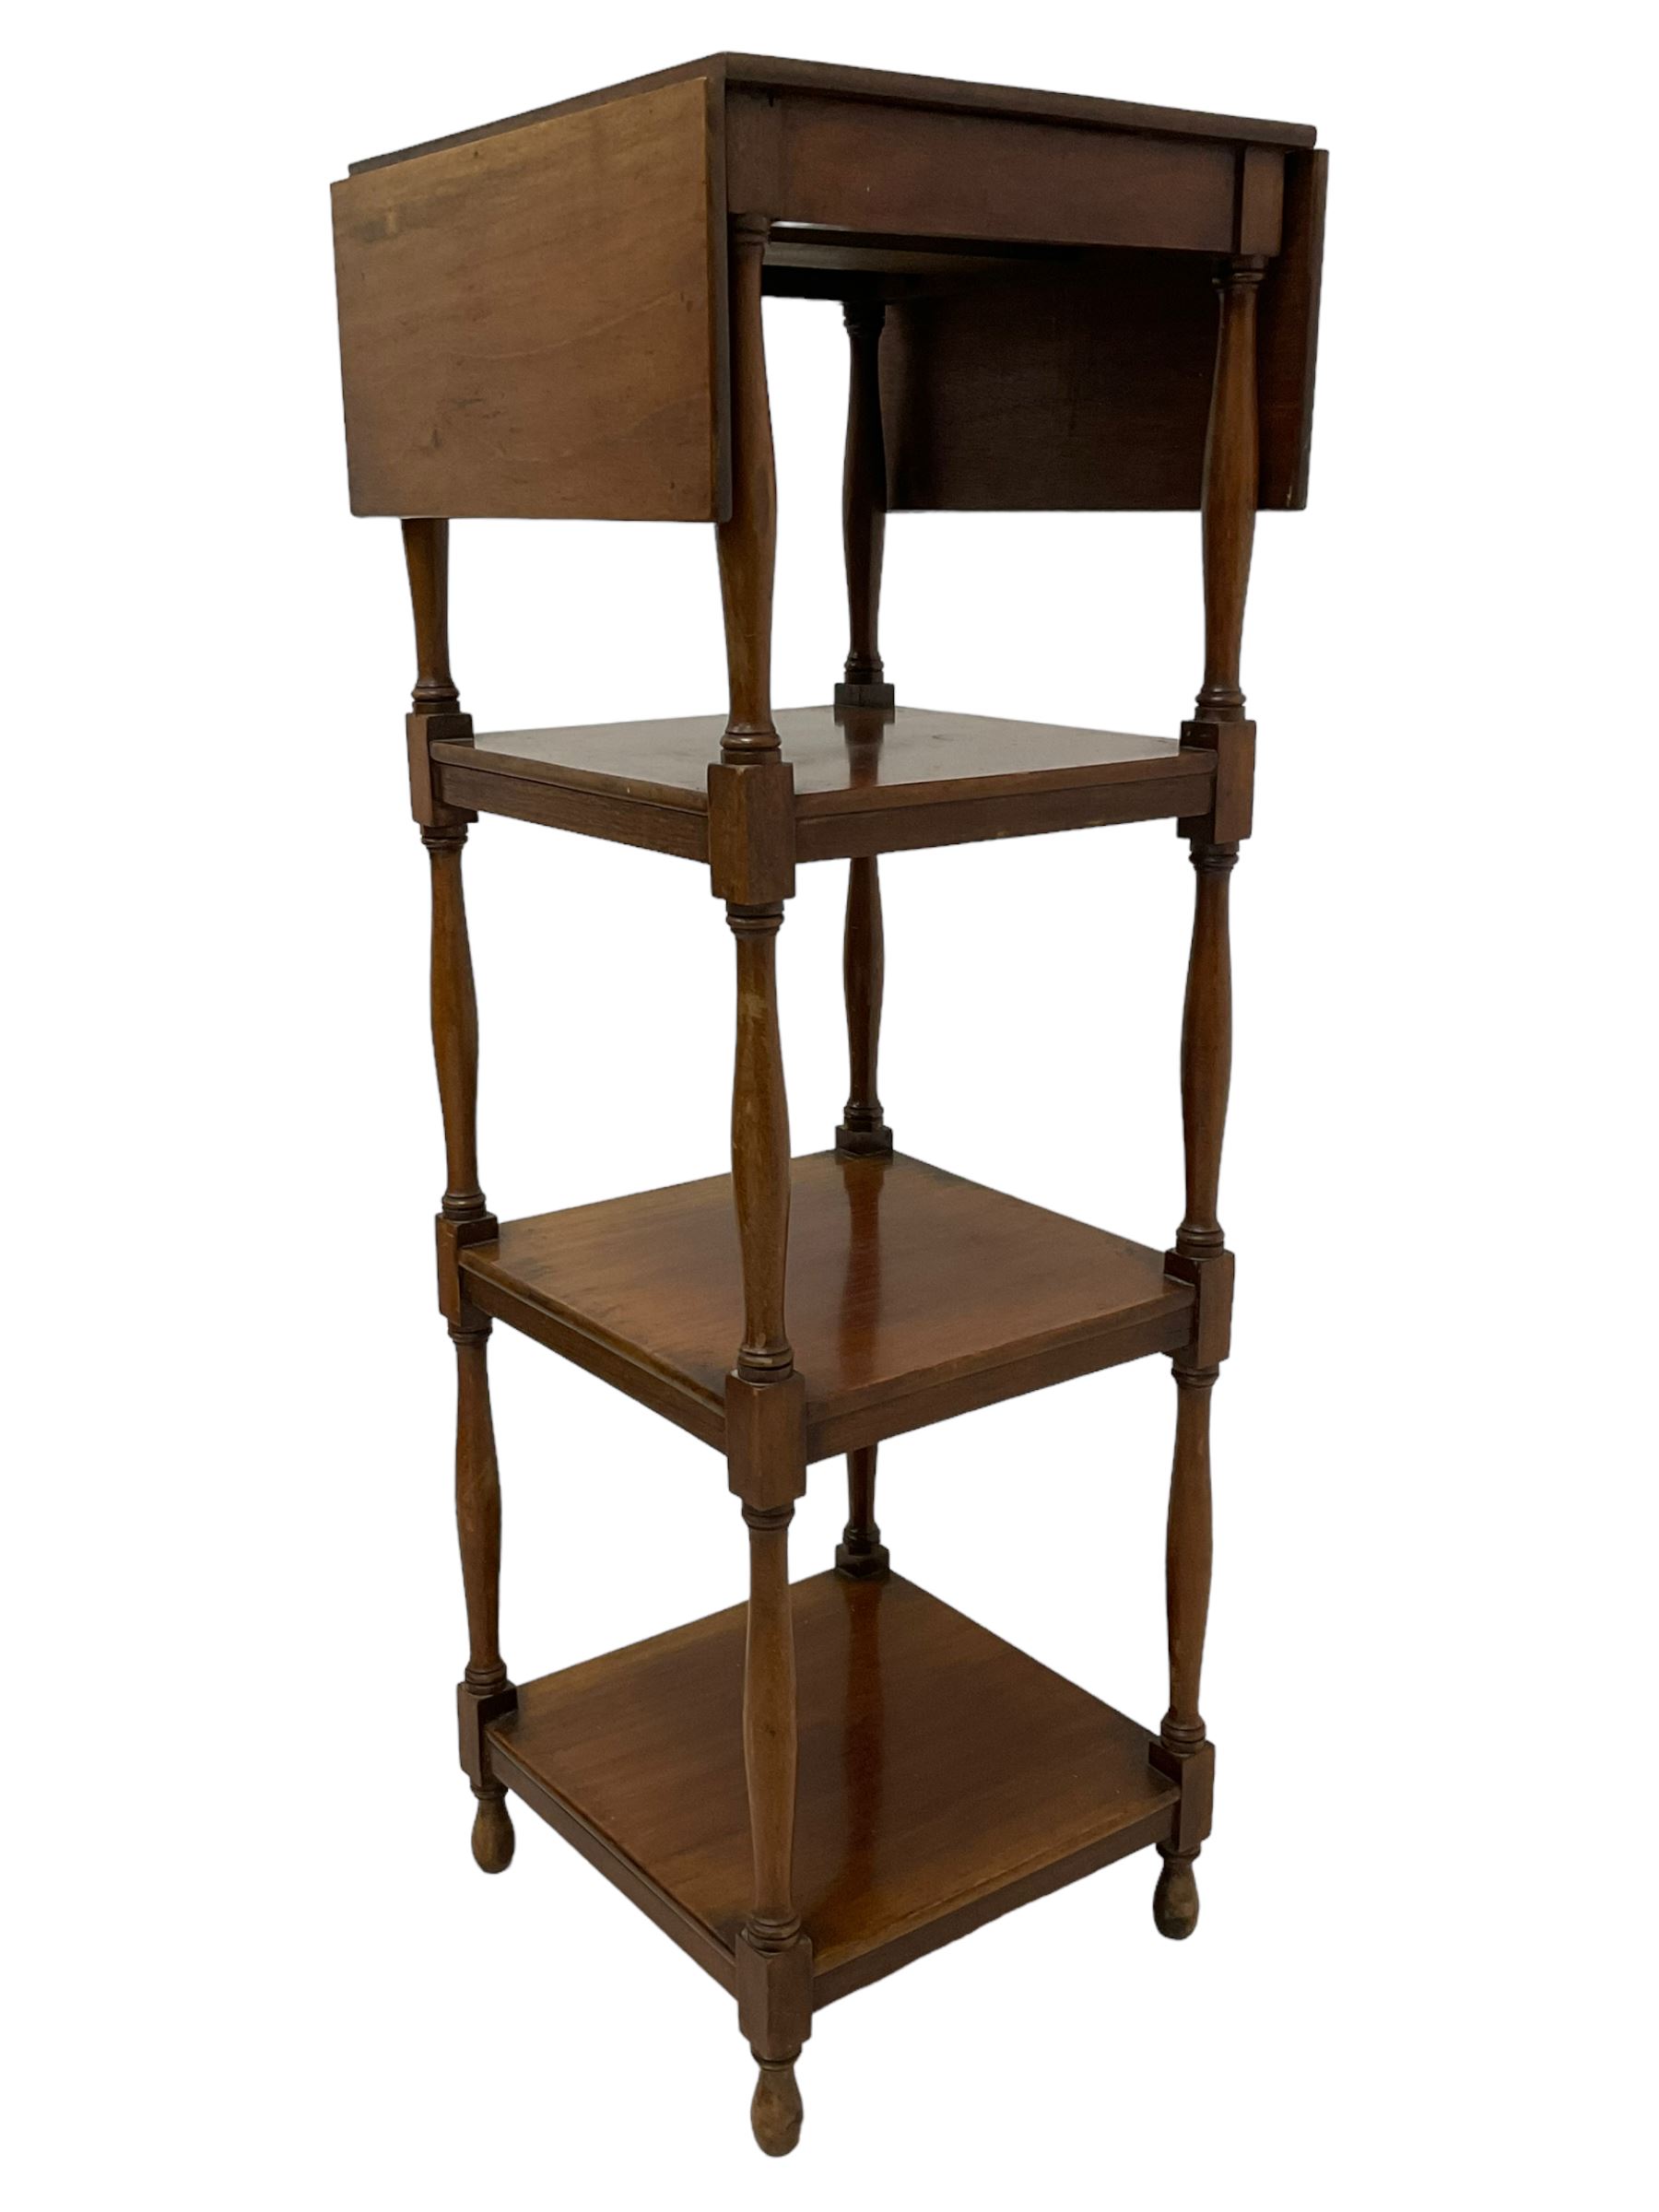 19th century walnut four-tier what-not or stand - Image 2 of 5